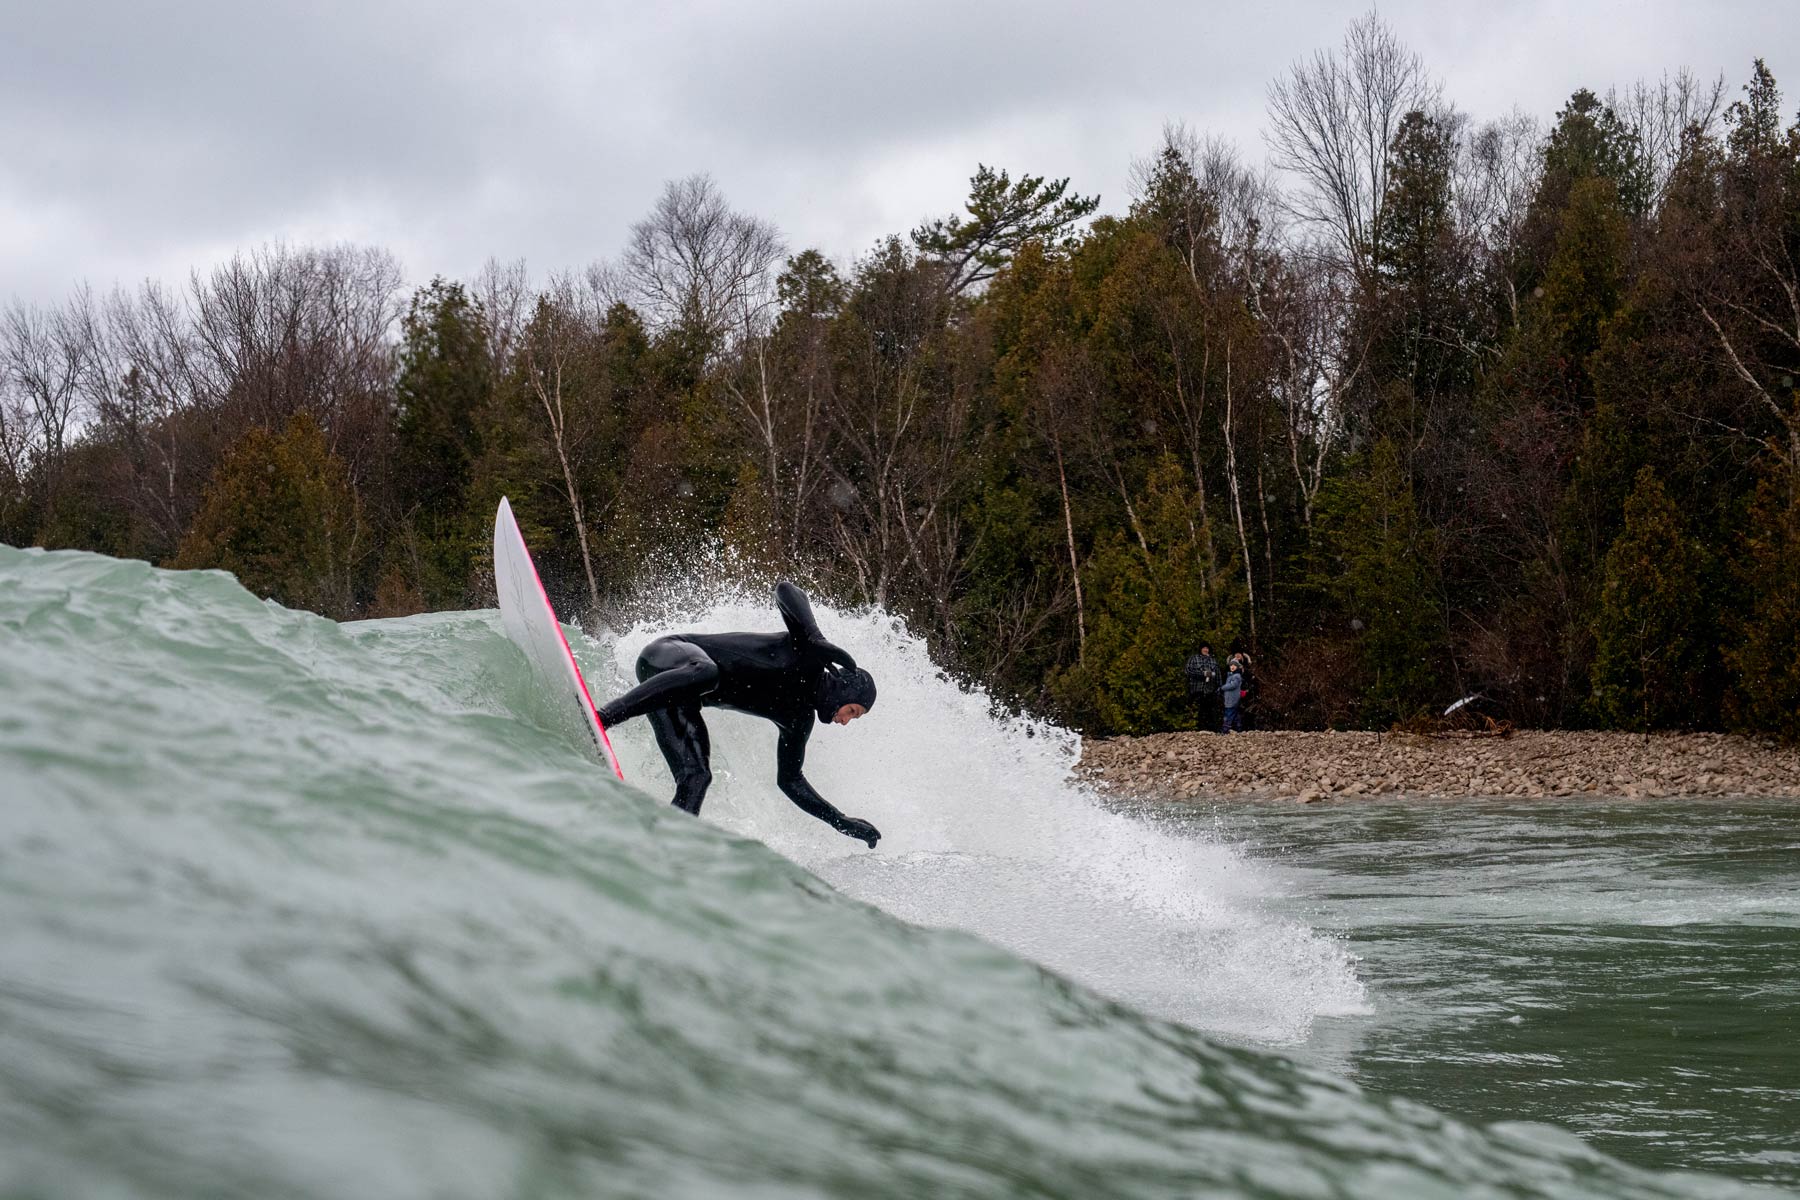 Made in Canada: Great Lakes. Kevin Schulz surfs the Great Lakes. Photograph by Ryan Osman